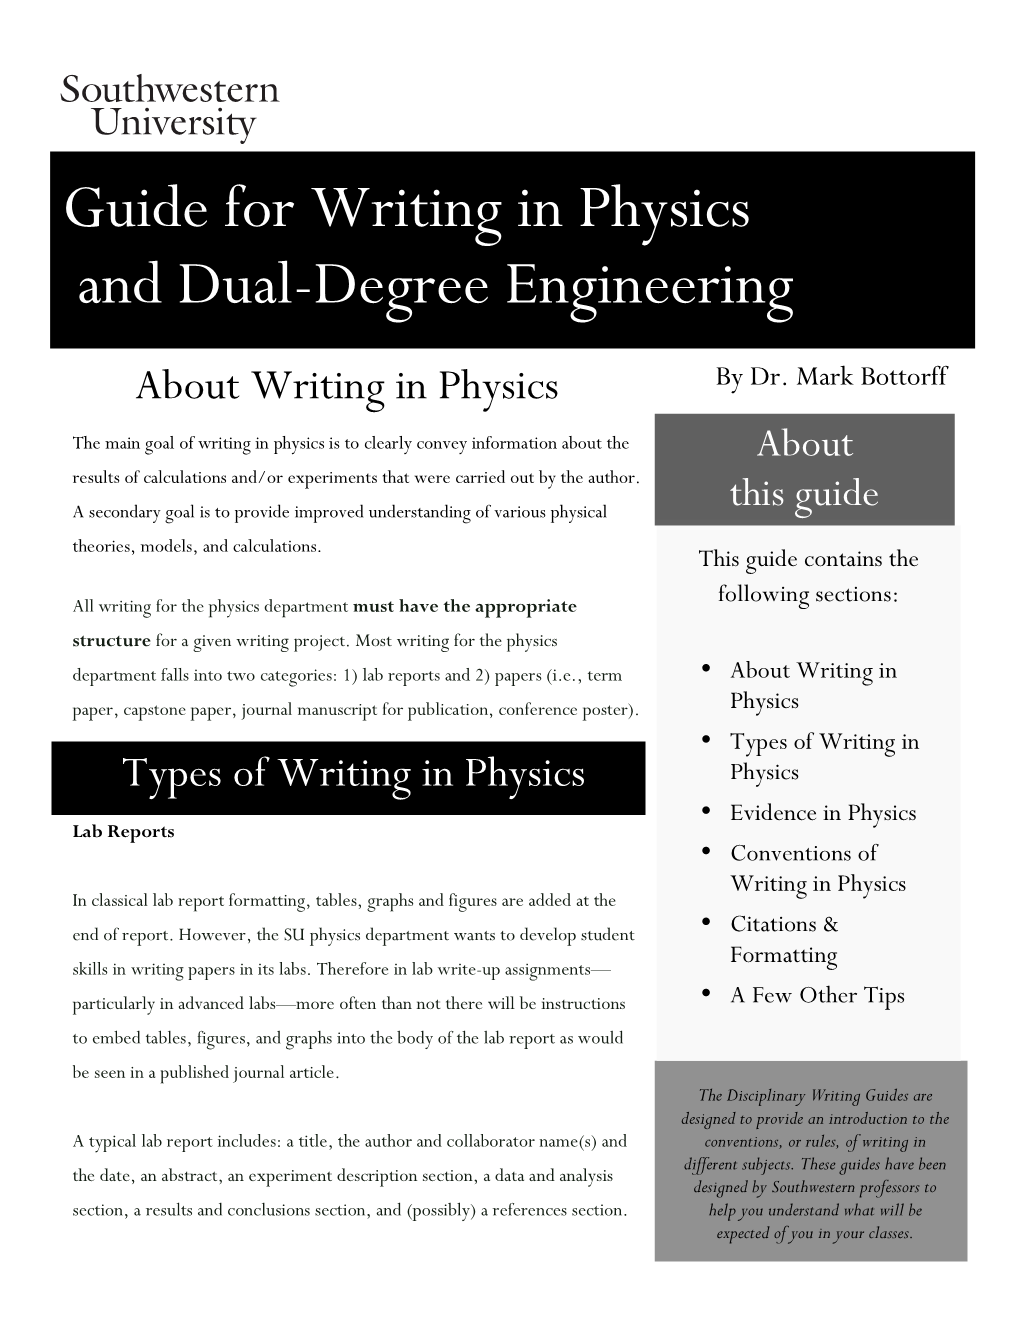 Guide for Writing in Physics and Dual-Degree Engineering